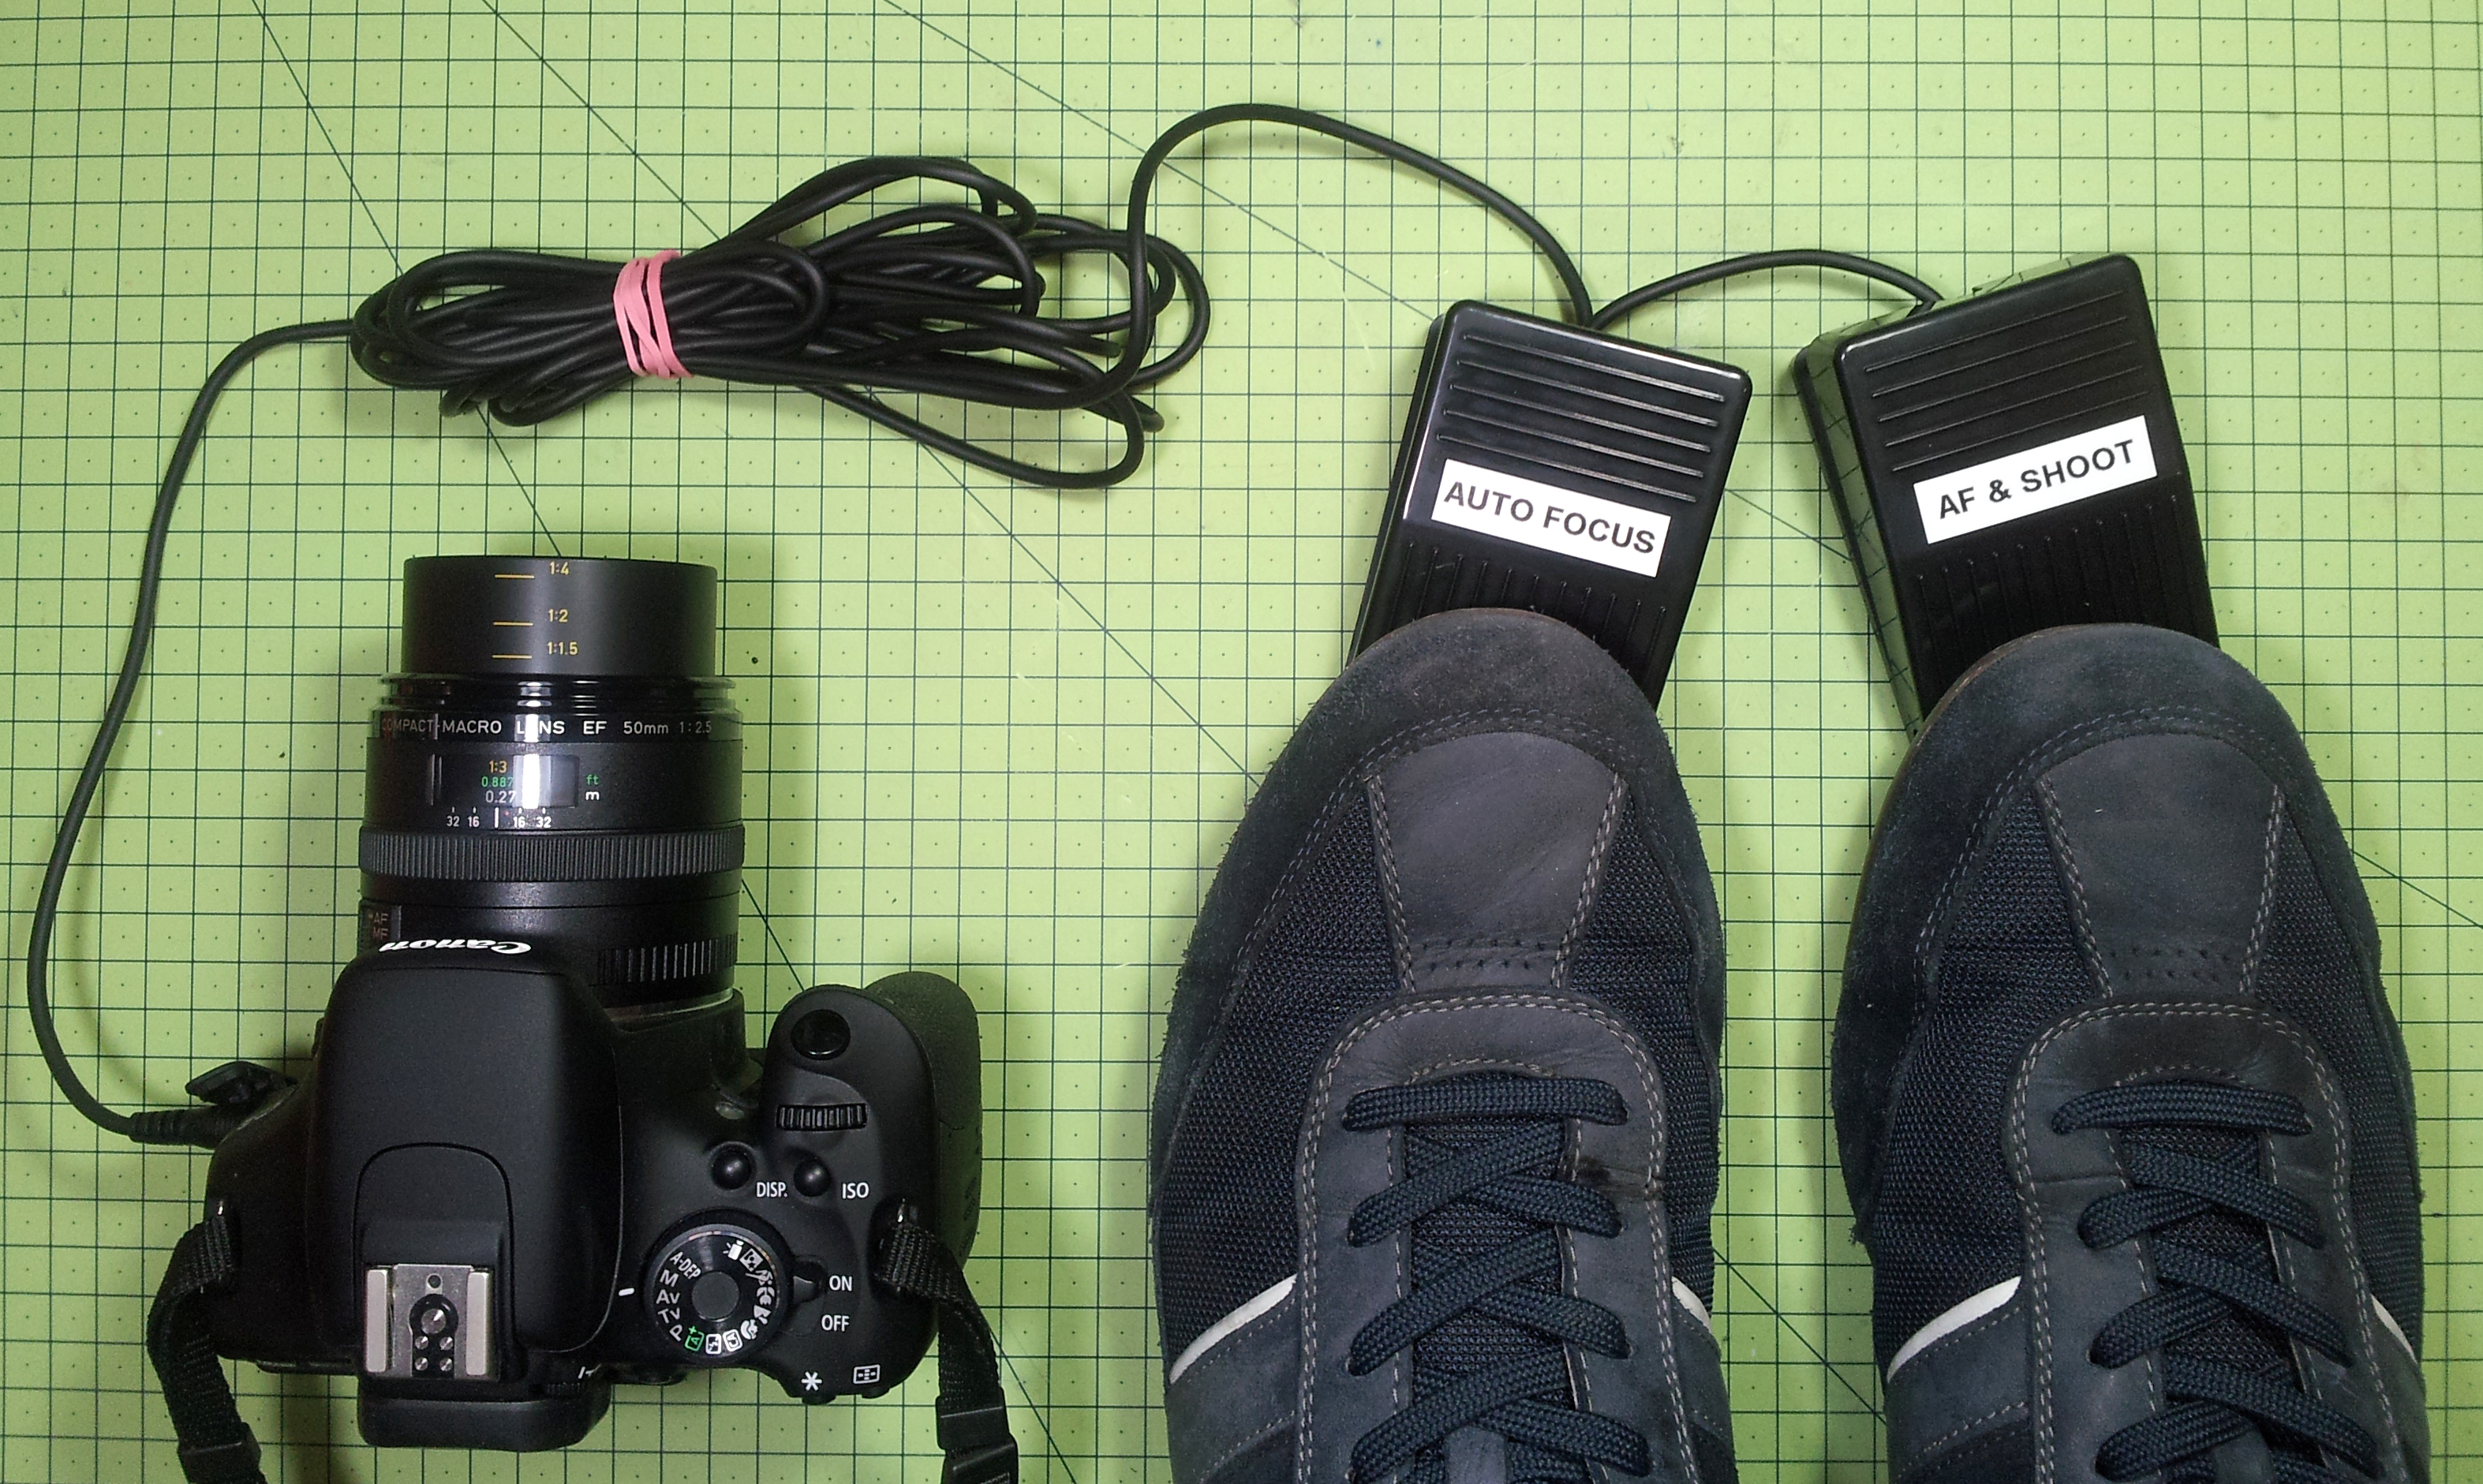 Rig Up These Foot Pedals for Hands-Free DSLR Photography